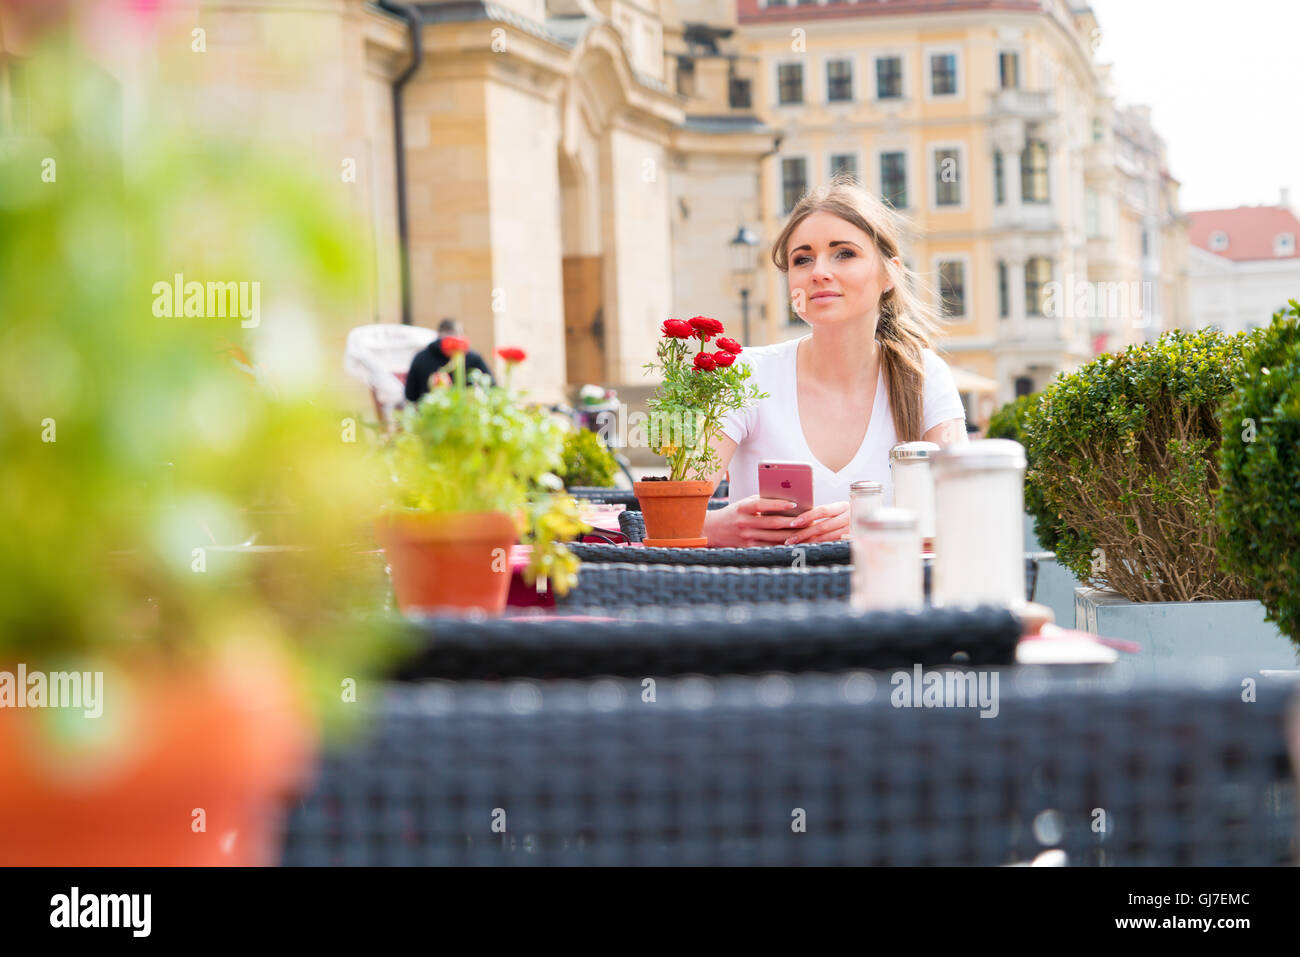 Woman drinking cappuccino at an outdoor cafe Stock Photo